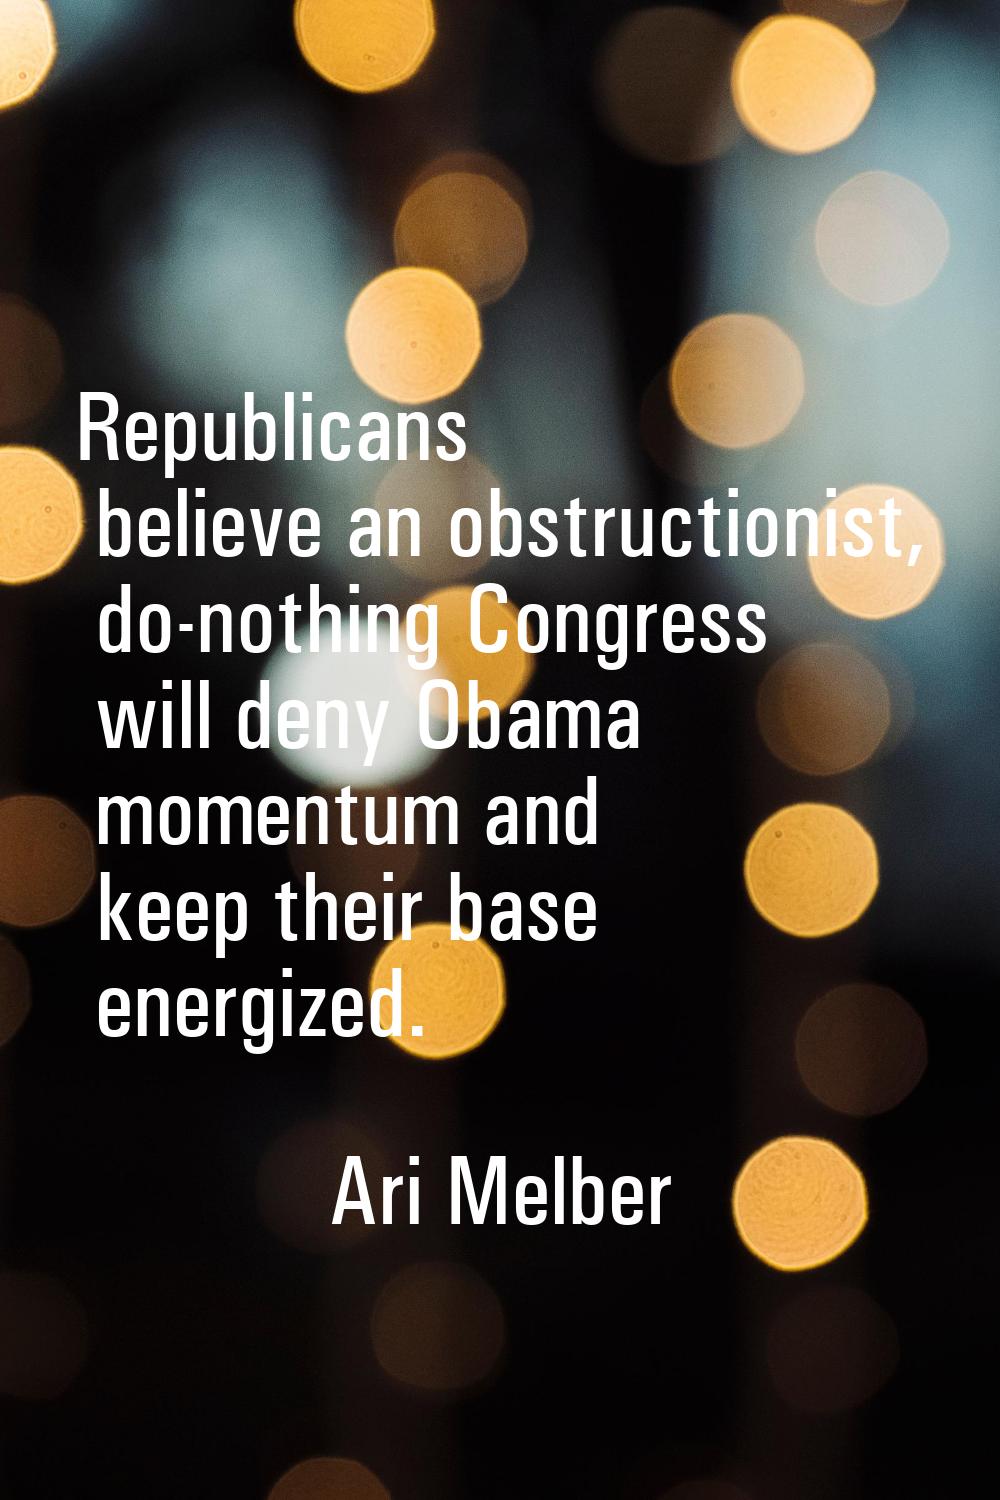 Republicans believe an obstructionist, do-nothing Congress will deny Obama momentum and keep their 